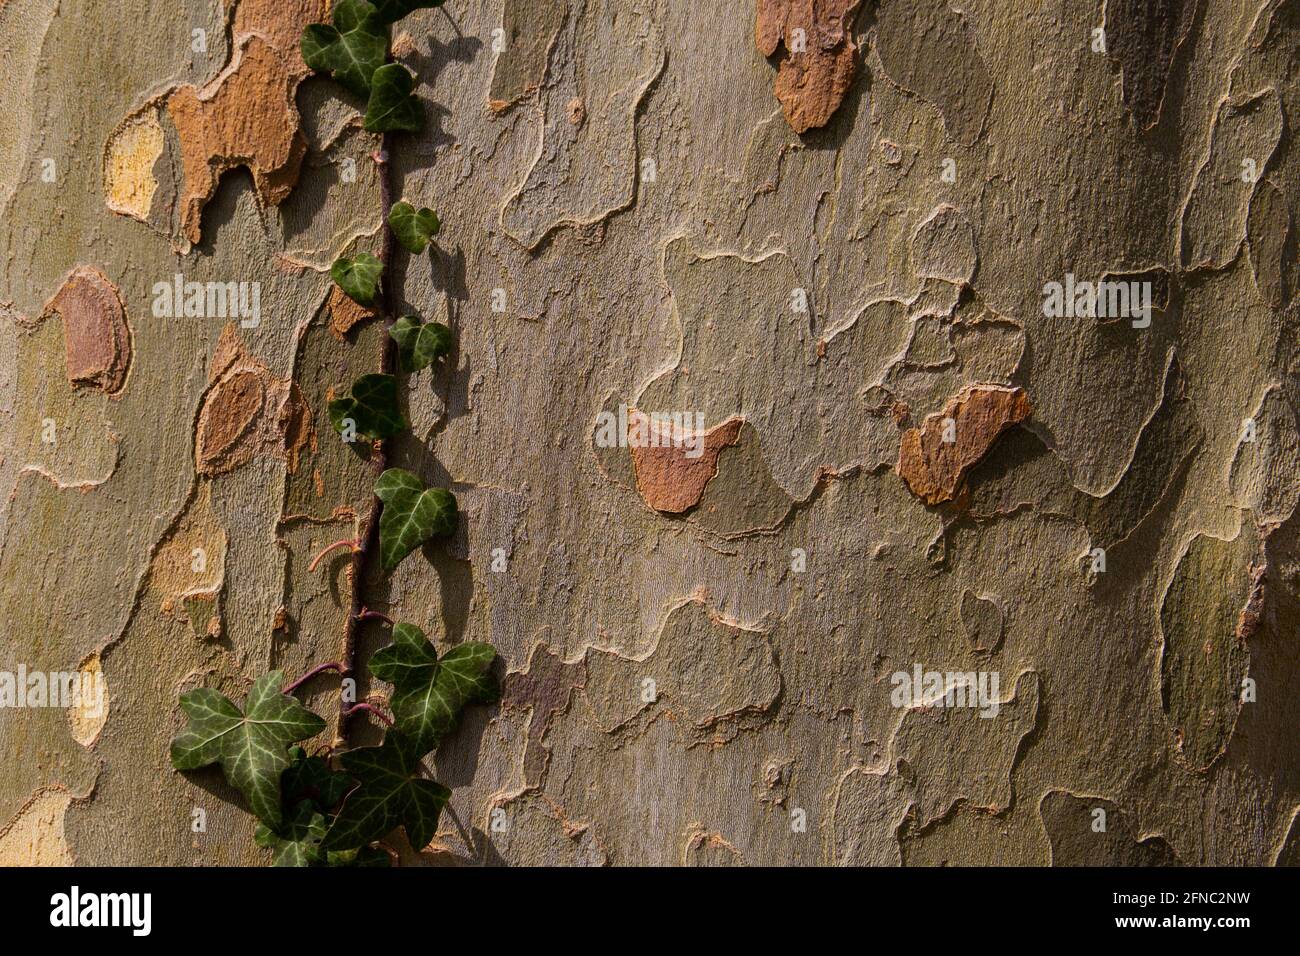 Ivy growing on the bark of a plane tree for natural background with copy space, also called sycamore, platane or Platanus acerifolia Stock Photo